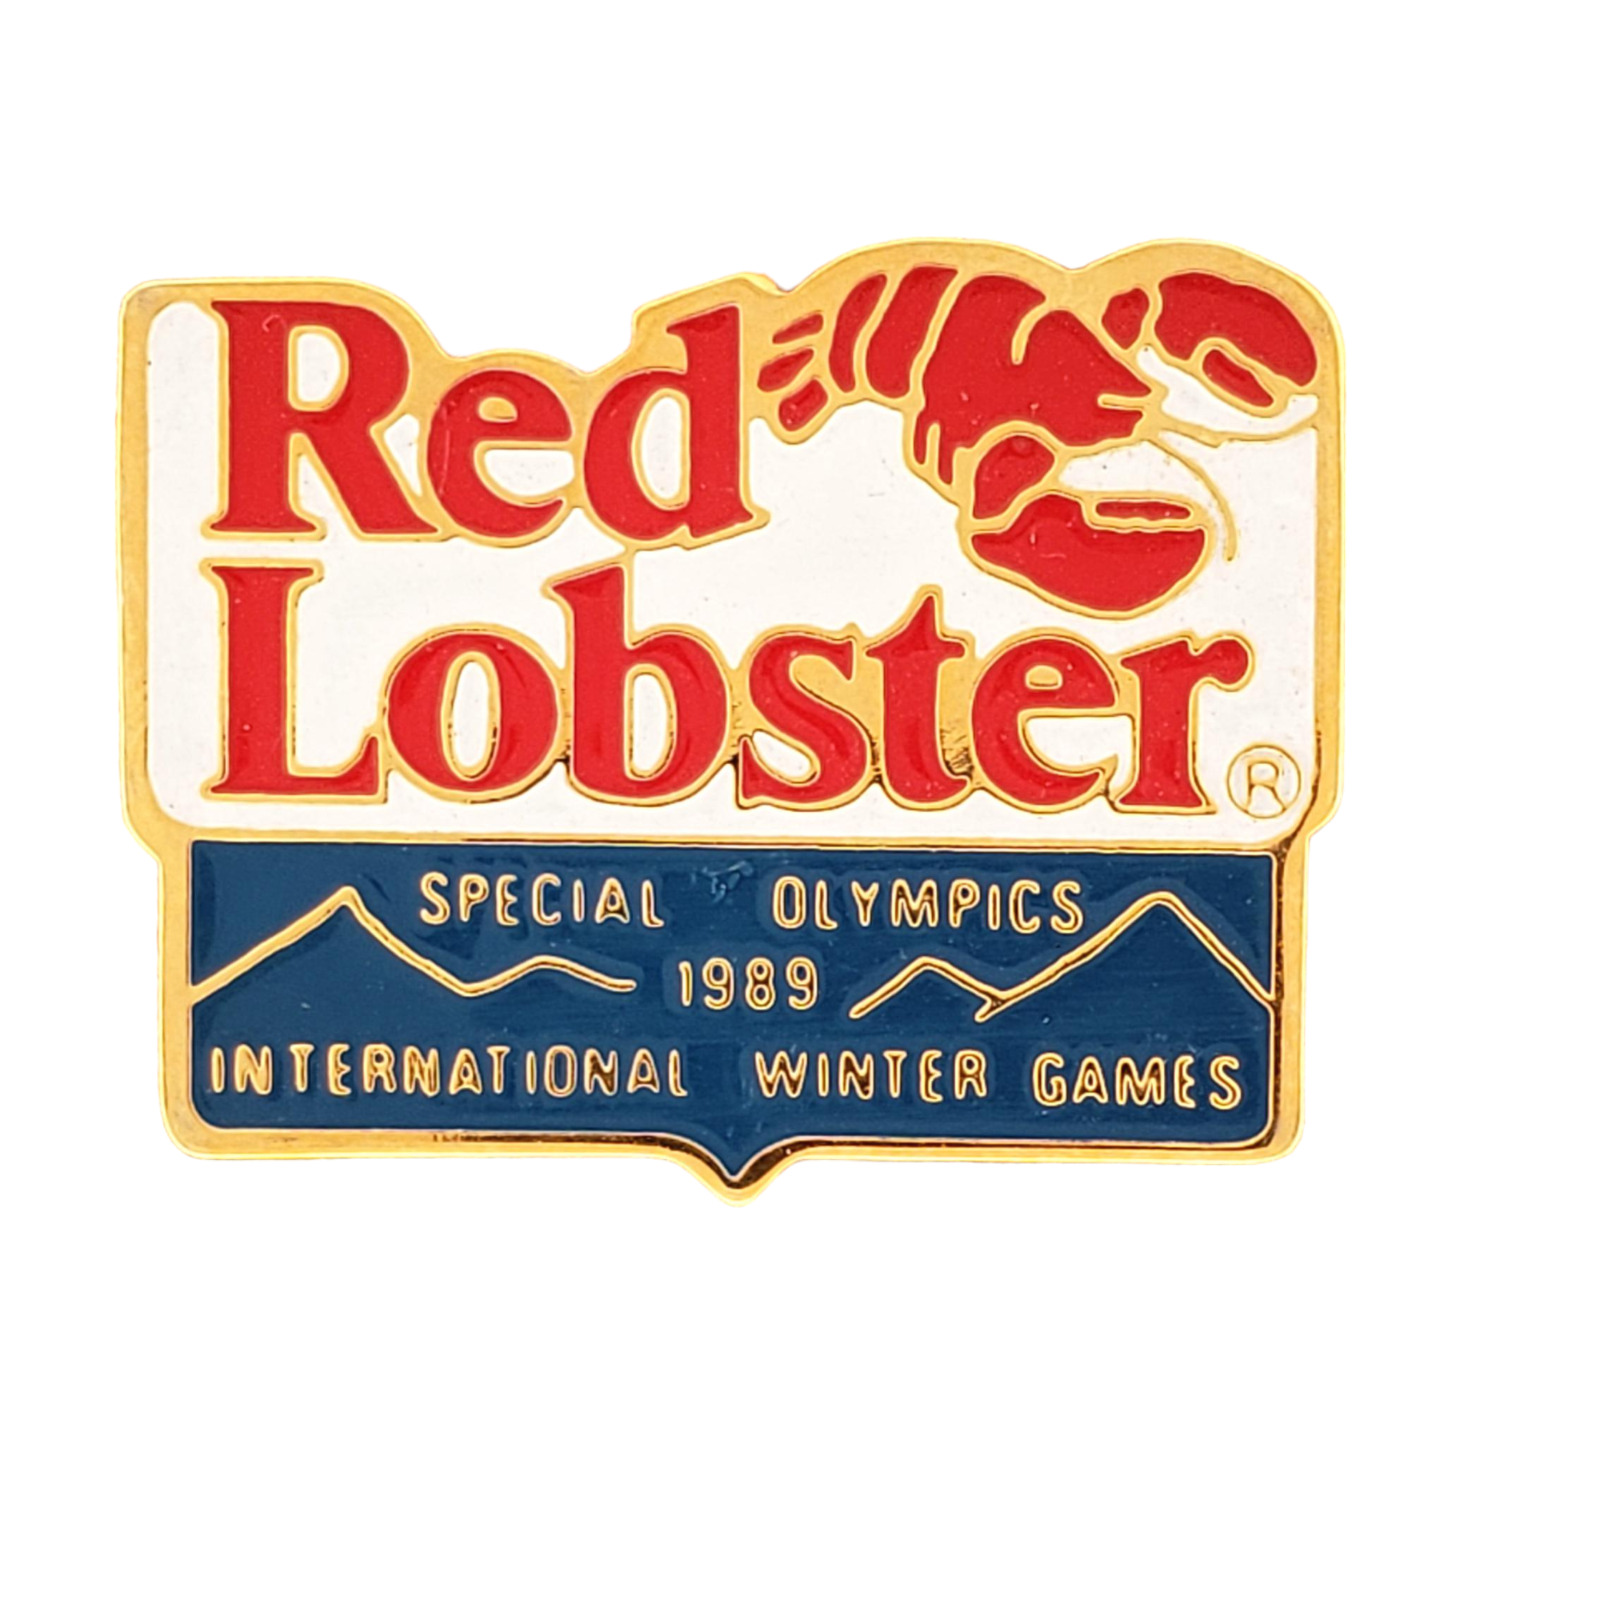 Vintage RED LOBSTER Special Olympics International Winter Games Lapel Pin 1989